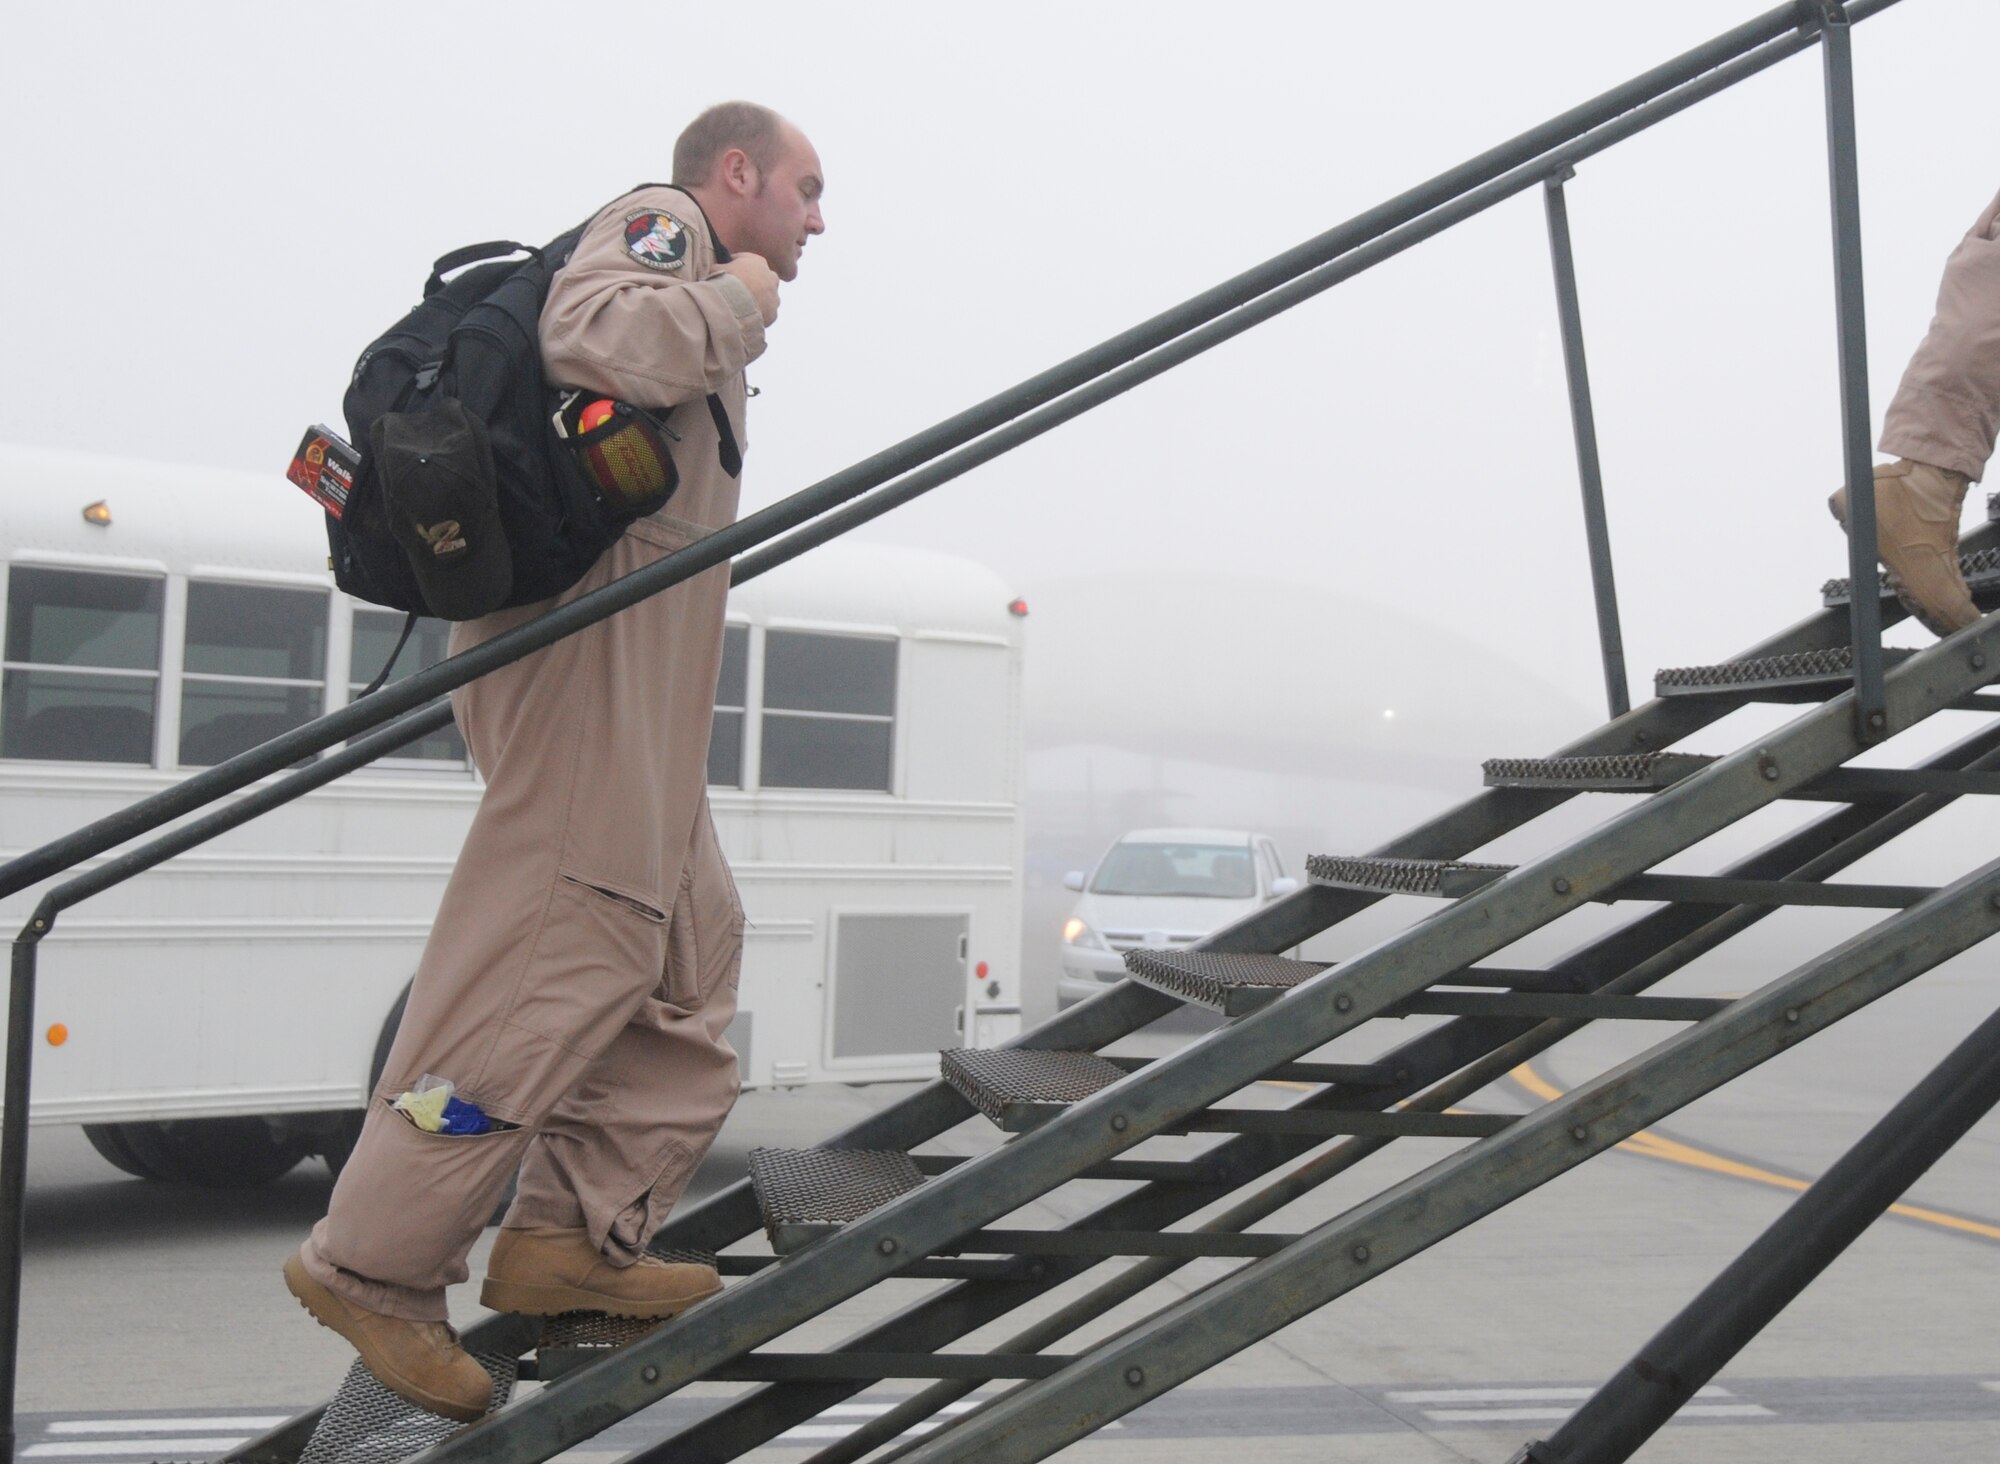 SOUTHWEST ASIA -- Flight Lt. Nathan Yabsley with the 965th Expeditionary Airborne Air Control Squadron prepares to board an E-3 Sentry here Dec. 24. He was preparing to fly his final mission at the 380th Air Expeditionary Wing before headaing home to Australia. He has been with the 965th out of Tinker Air Force Base, Okla. for three years with the last four months in a deployed location gaining valuable frontline experience. While deployed with the 965th Flight Lieutenant Yablsey has flown 20 missions in the area of responsibility in support of Operations Iraqi and Enduring Freedom. (U.S. Air Force photo/Tech. Sgt. Christopher A. Campbell)(released)